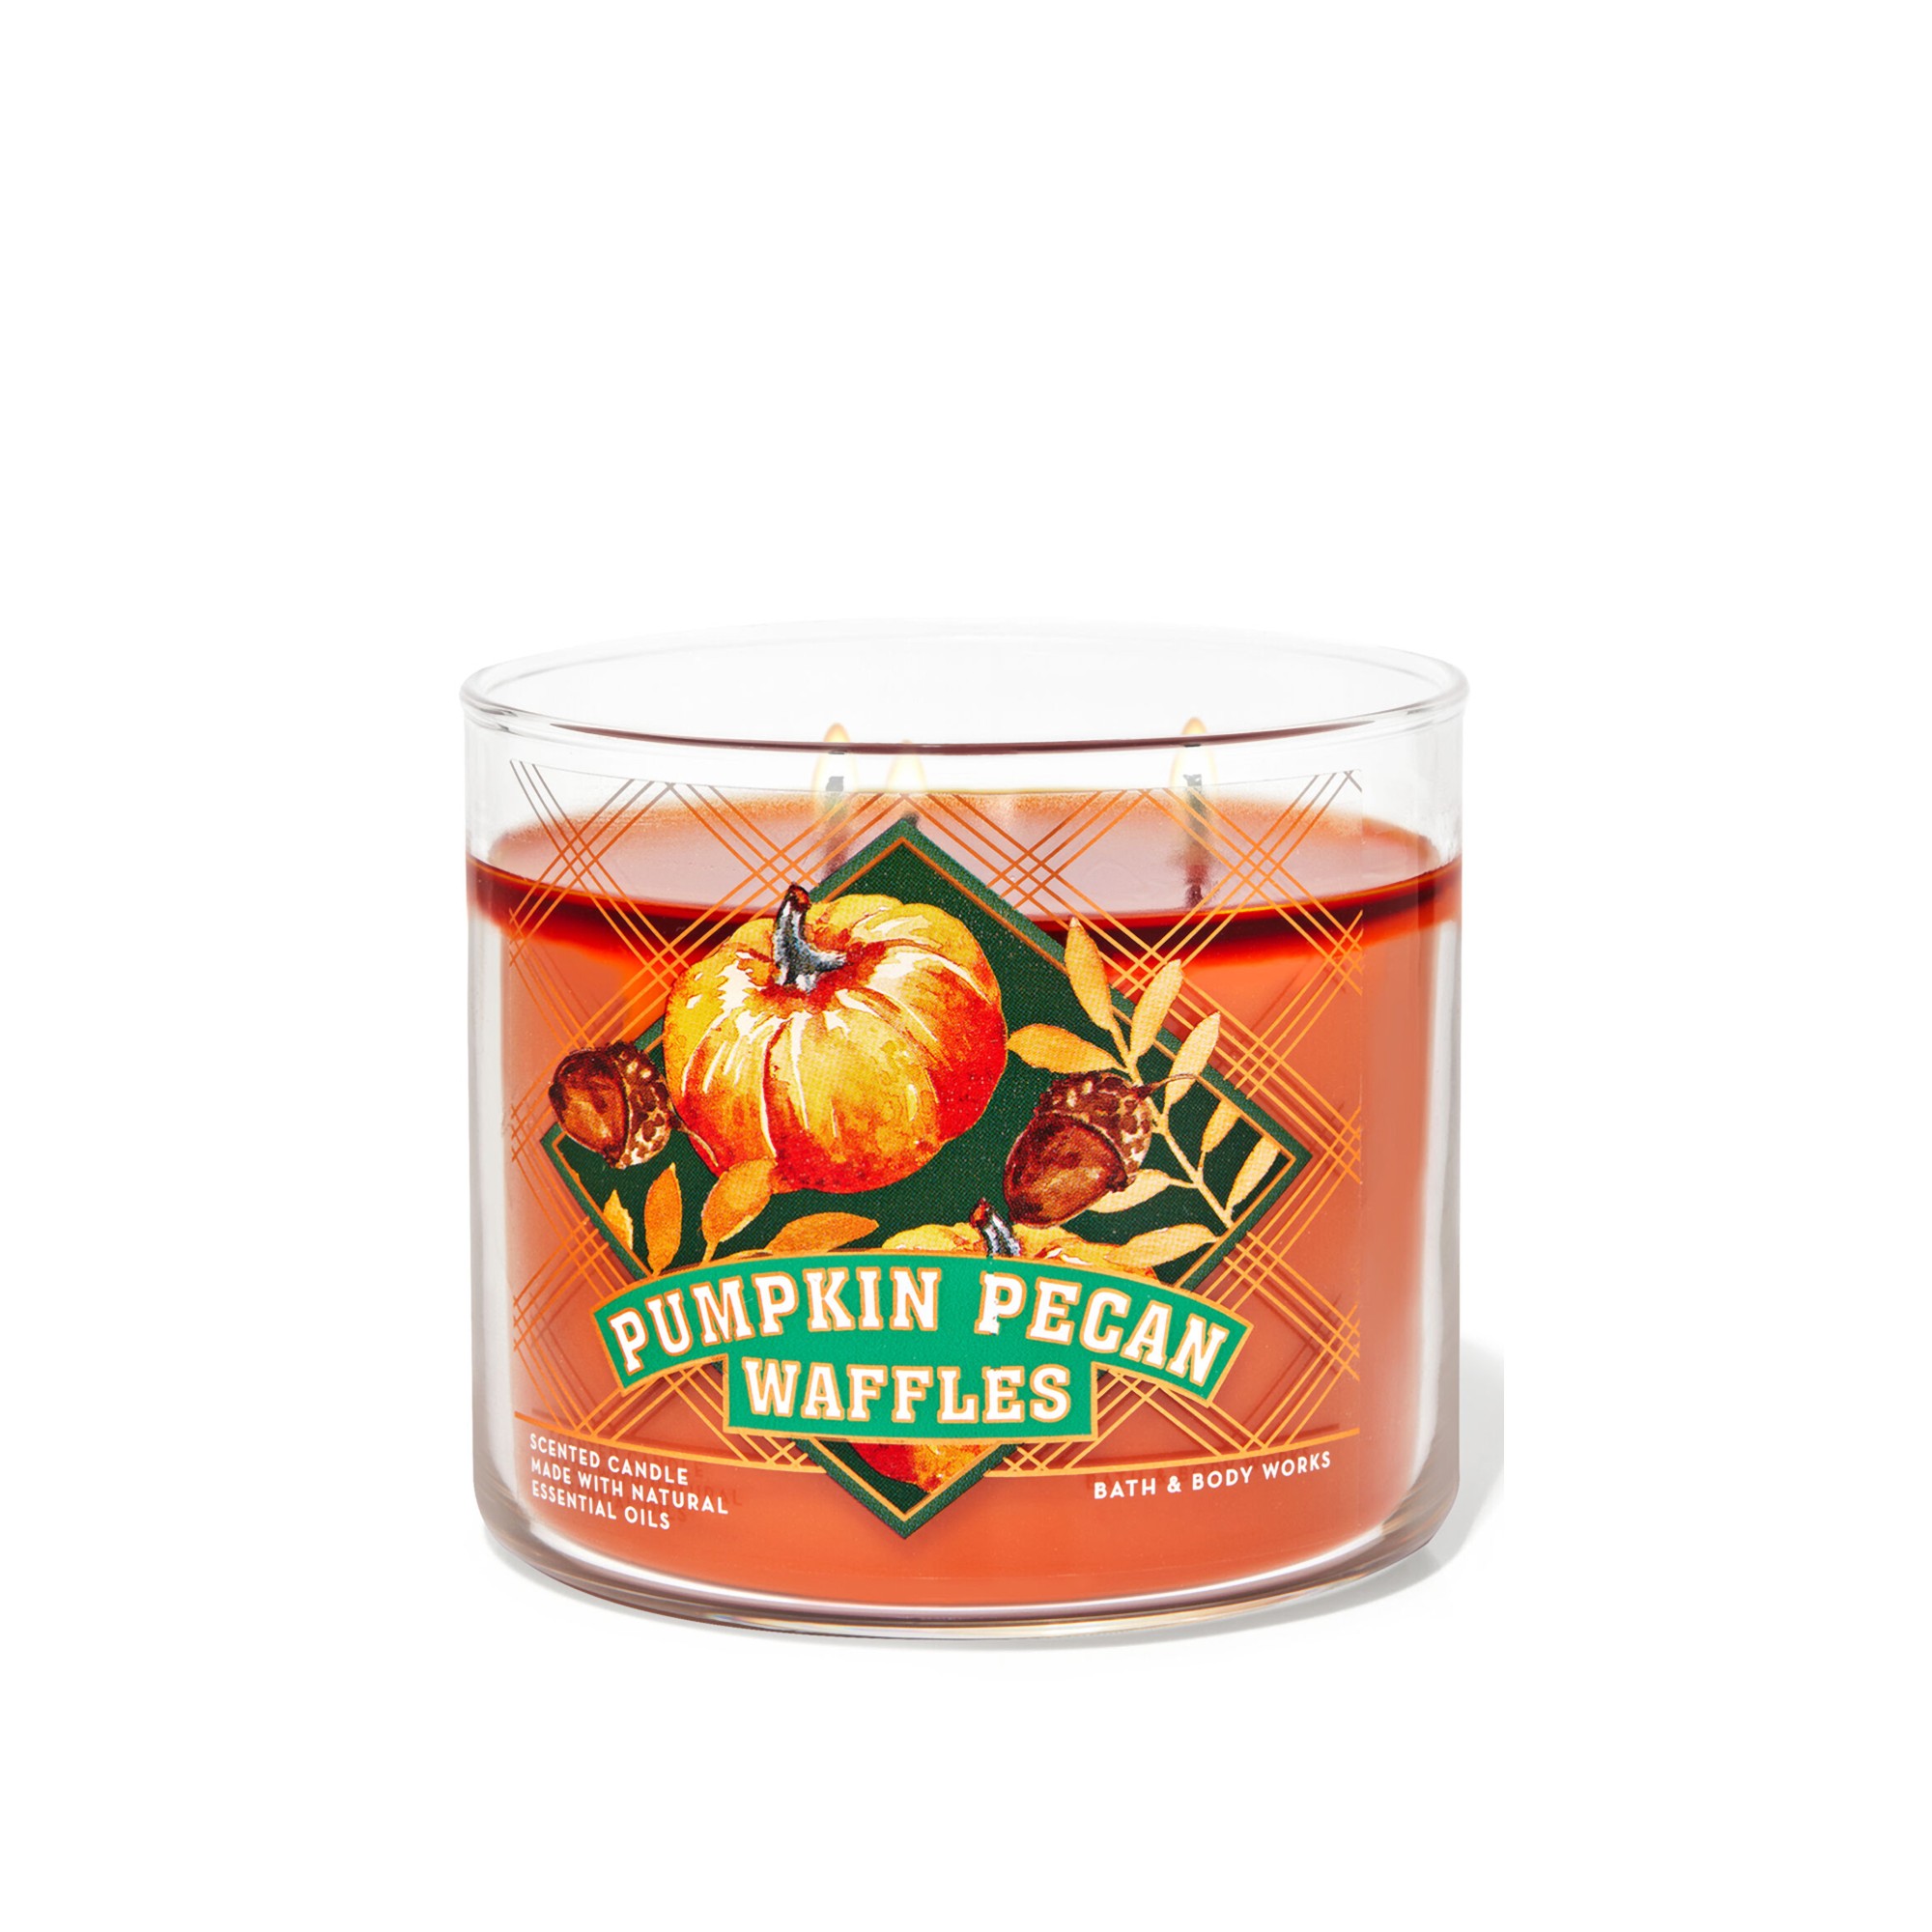 Bath & Body Works Pumpkin Pecan Waffles 3 Wick Scented Candle